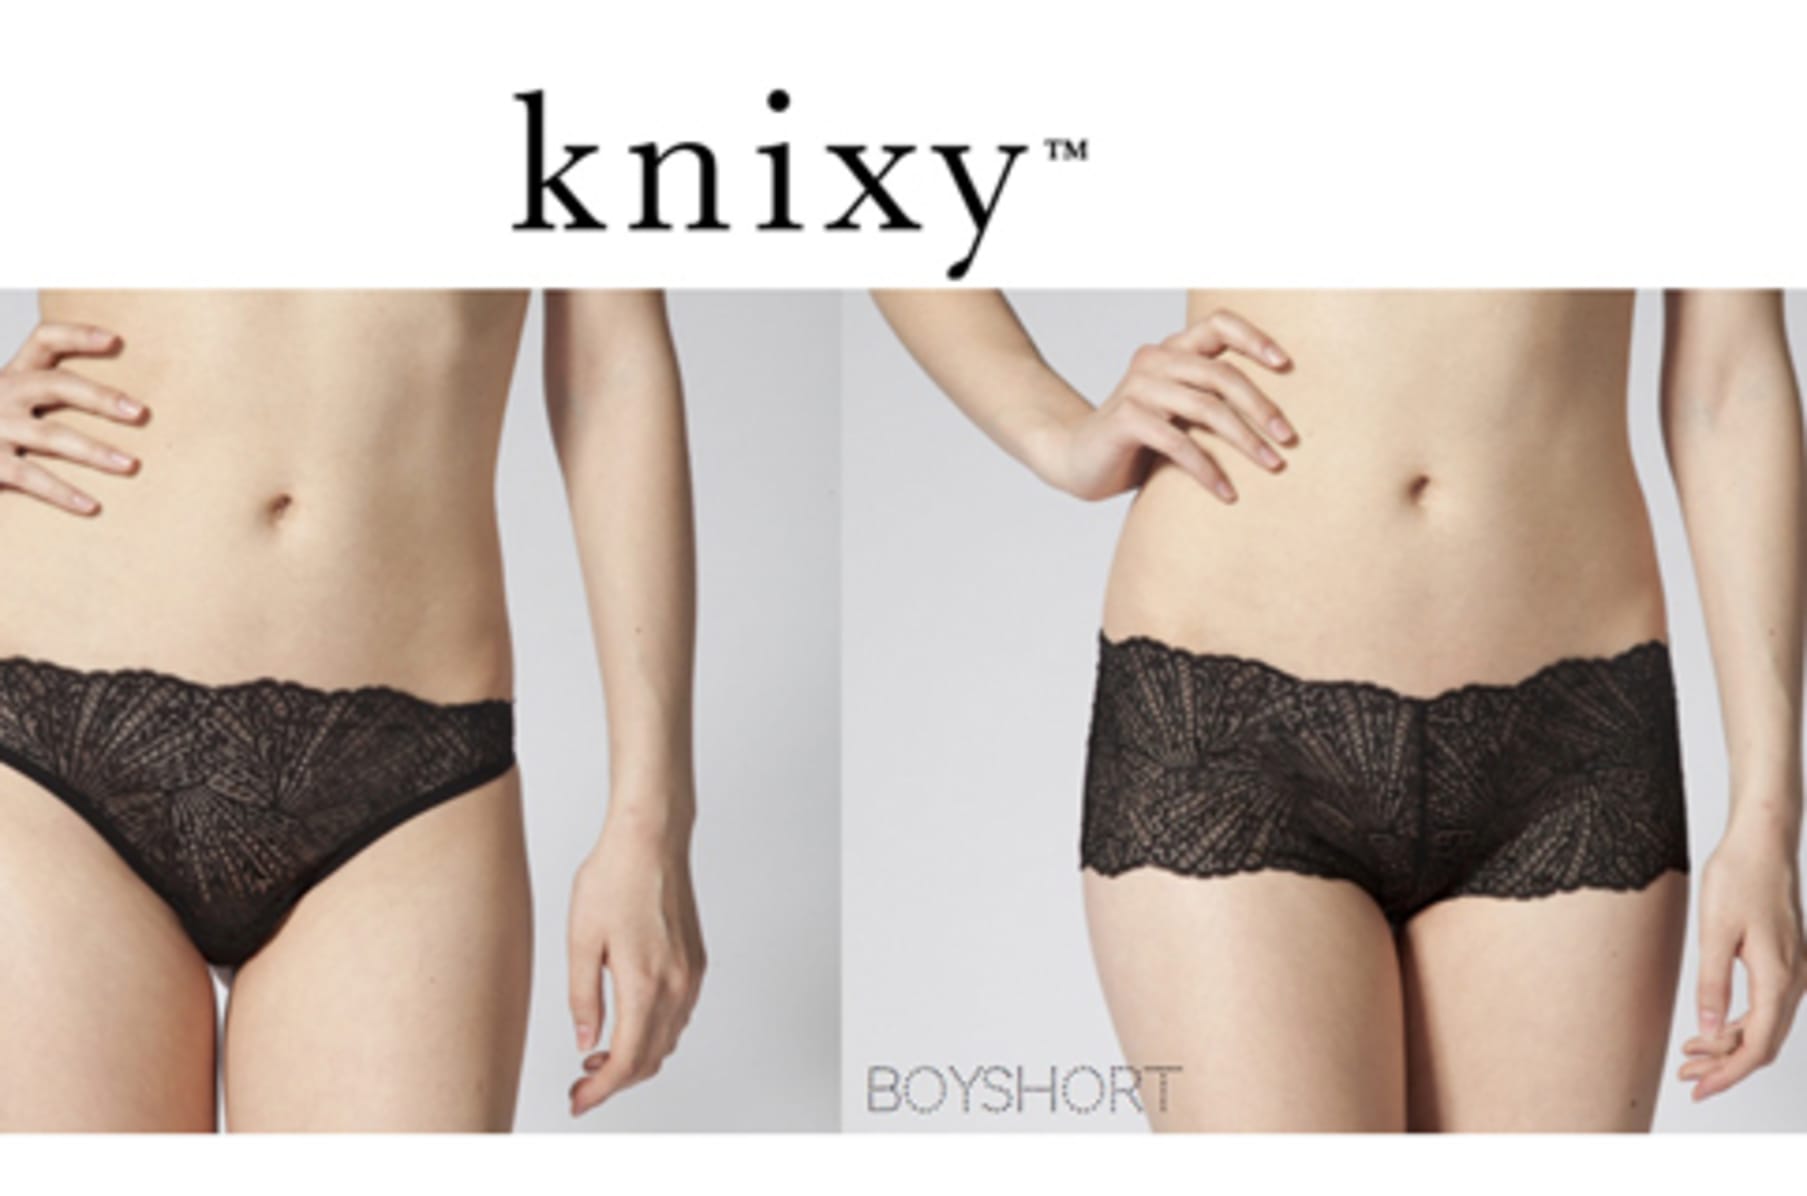 Crowdfunding Case Study: Knix Wear - The Indiegogo Review